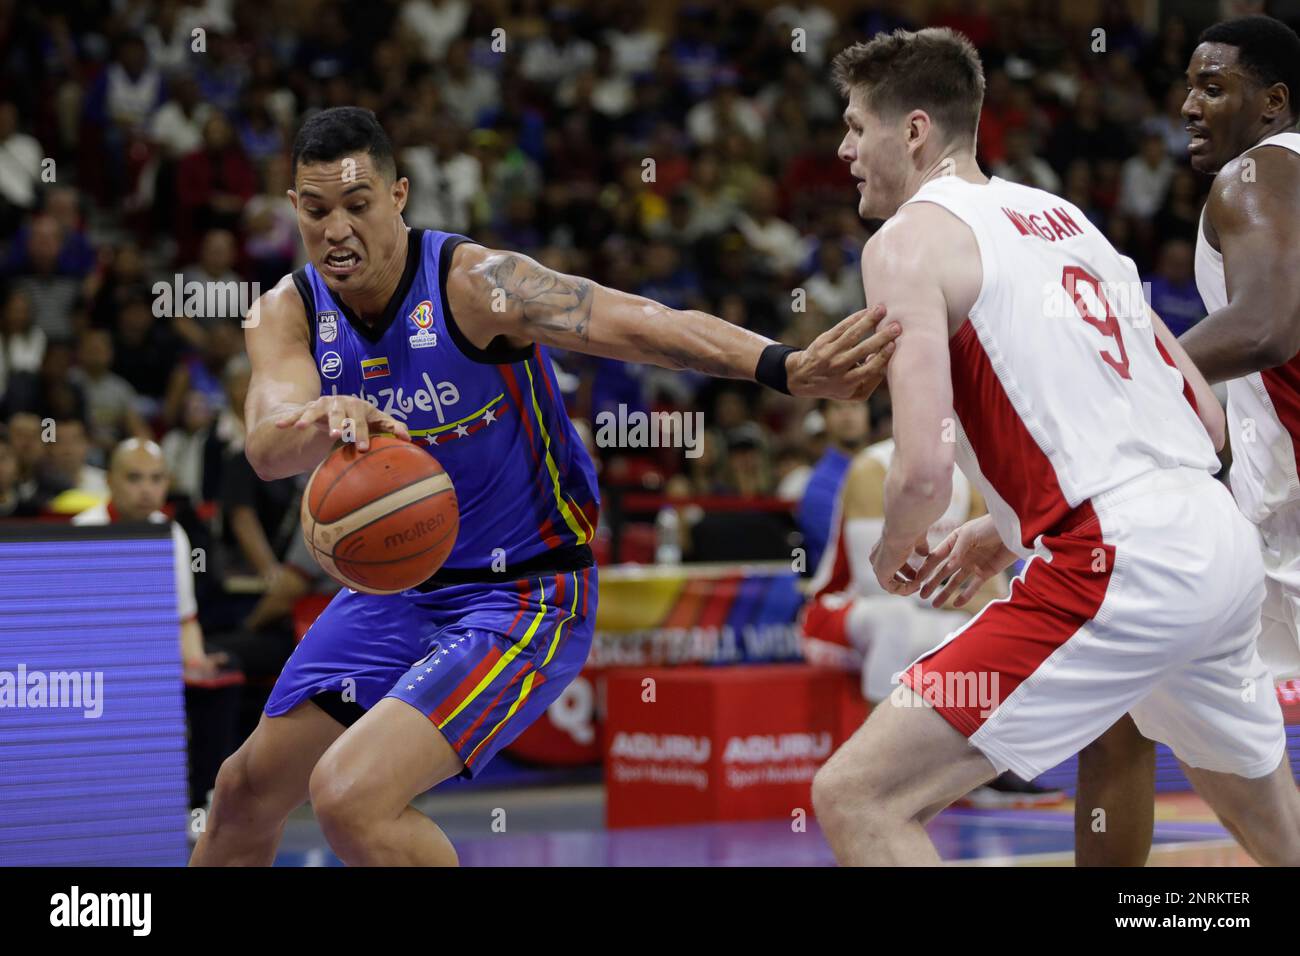 CARACAS, VENEZUELA - FEBRUARY 26: Windi Graterol of Venezuela competes for the ball with Conor Morgan of Canada during the FIBA Basketball World Cup 2023 Americas Qualifiers basketball game, Poliedro de Caracas, in Caracas, Venezuela, on February 26 of 2023. Credit: Px Images/Alamy Live News Stock Photo